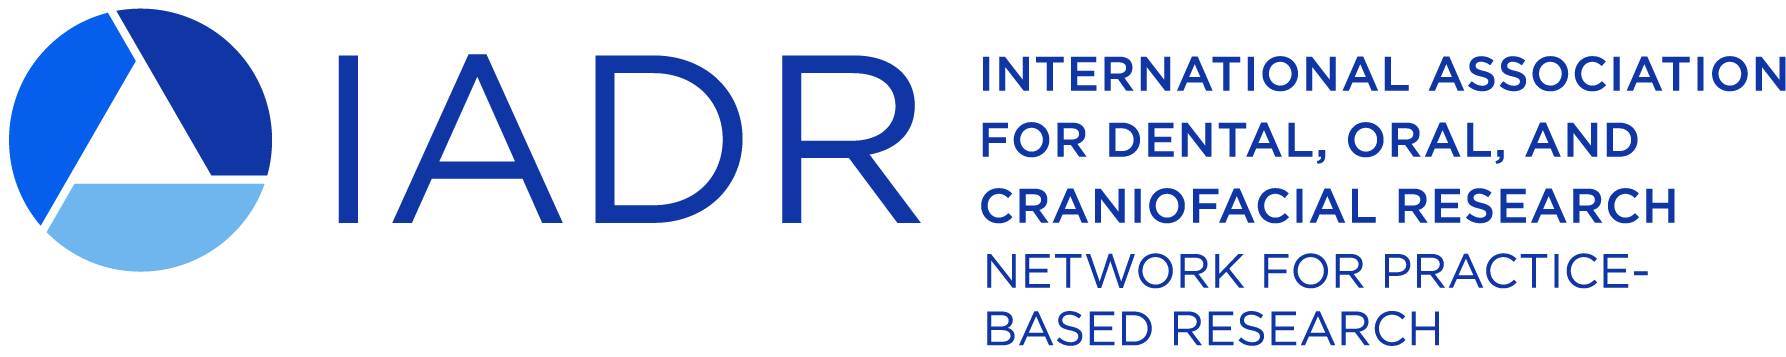 Network for Practiced-based research logo